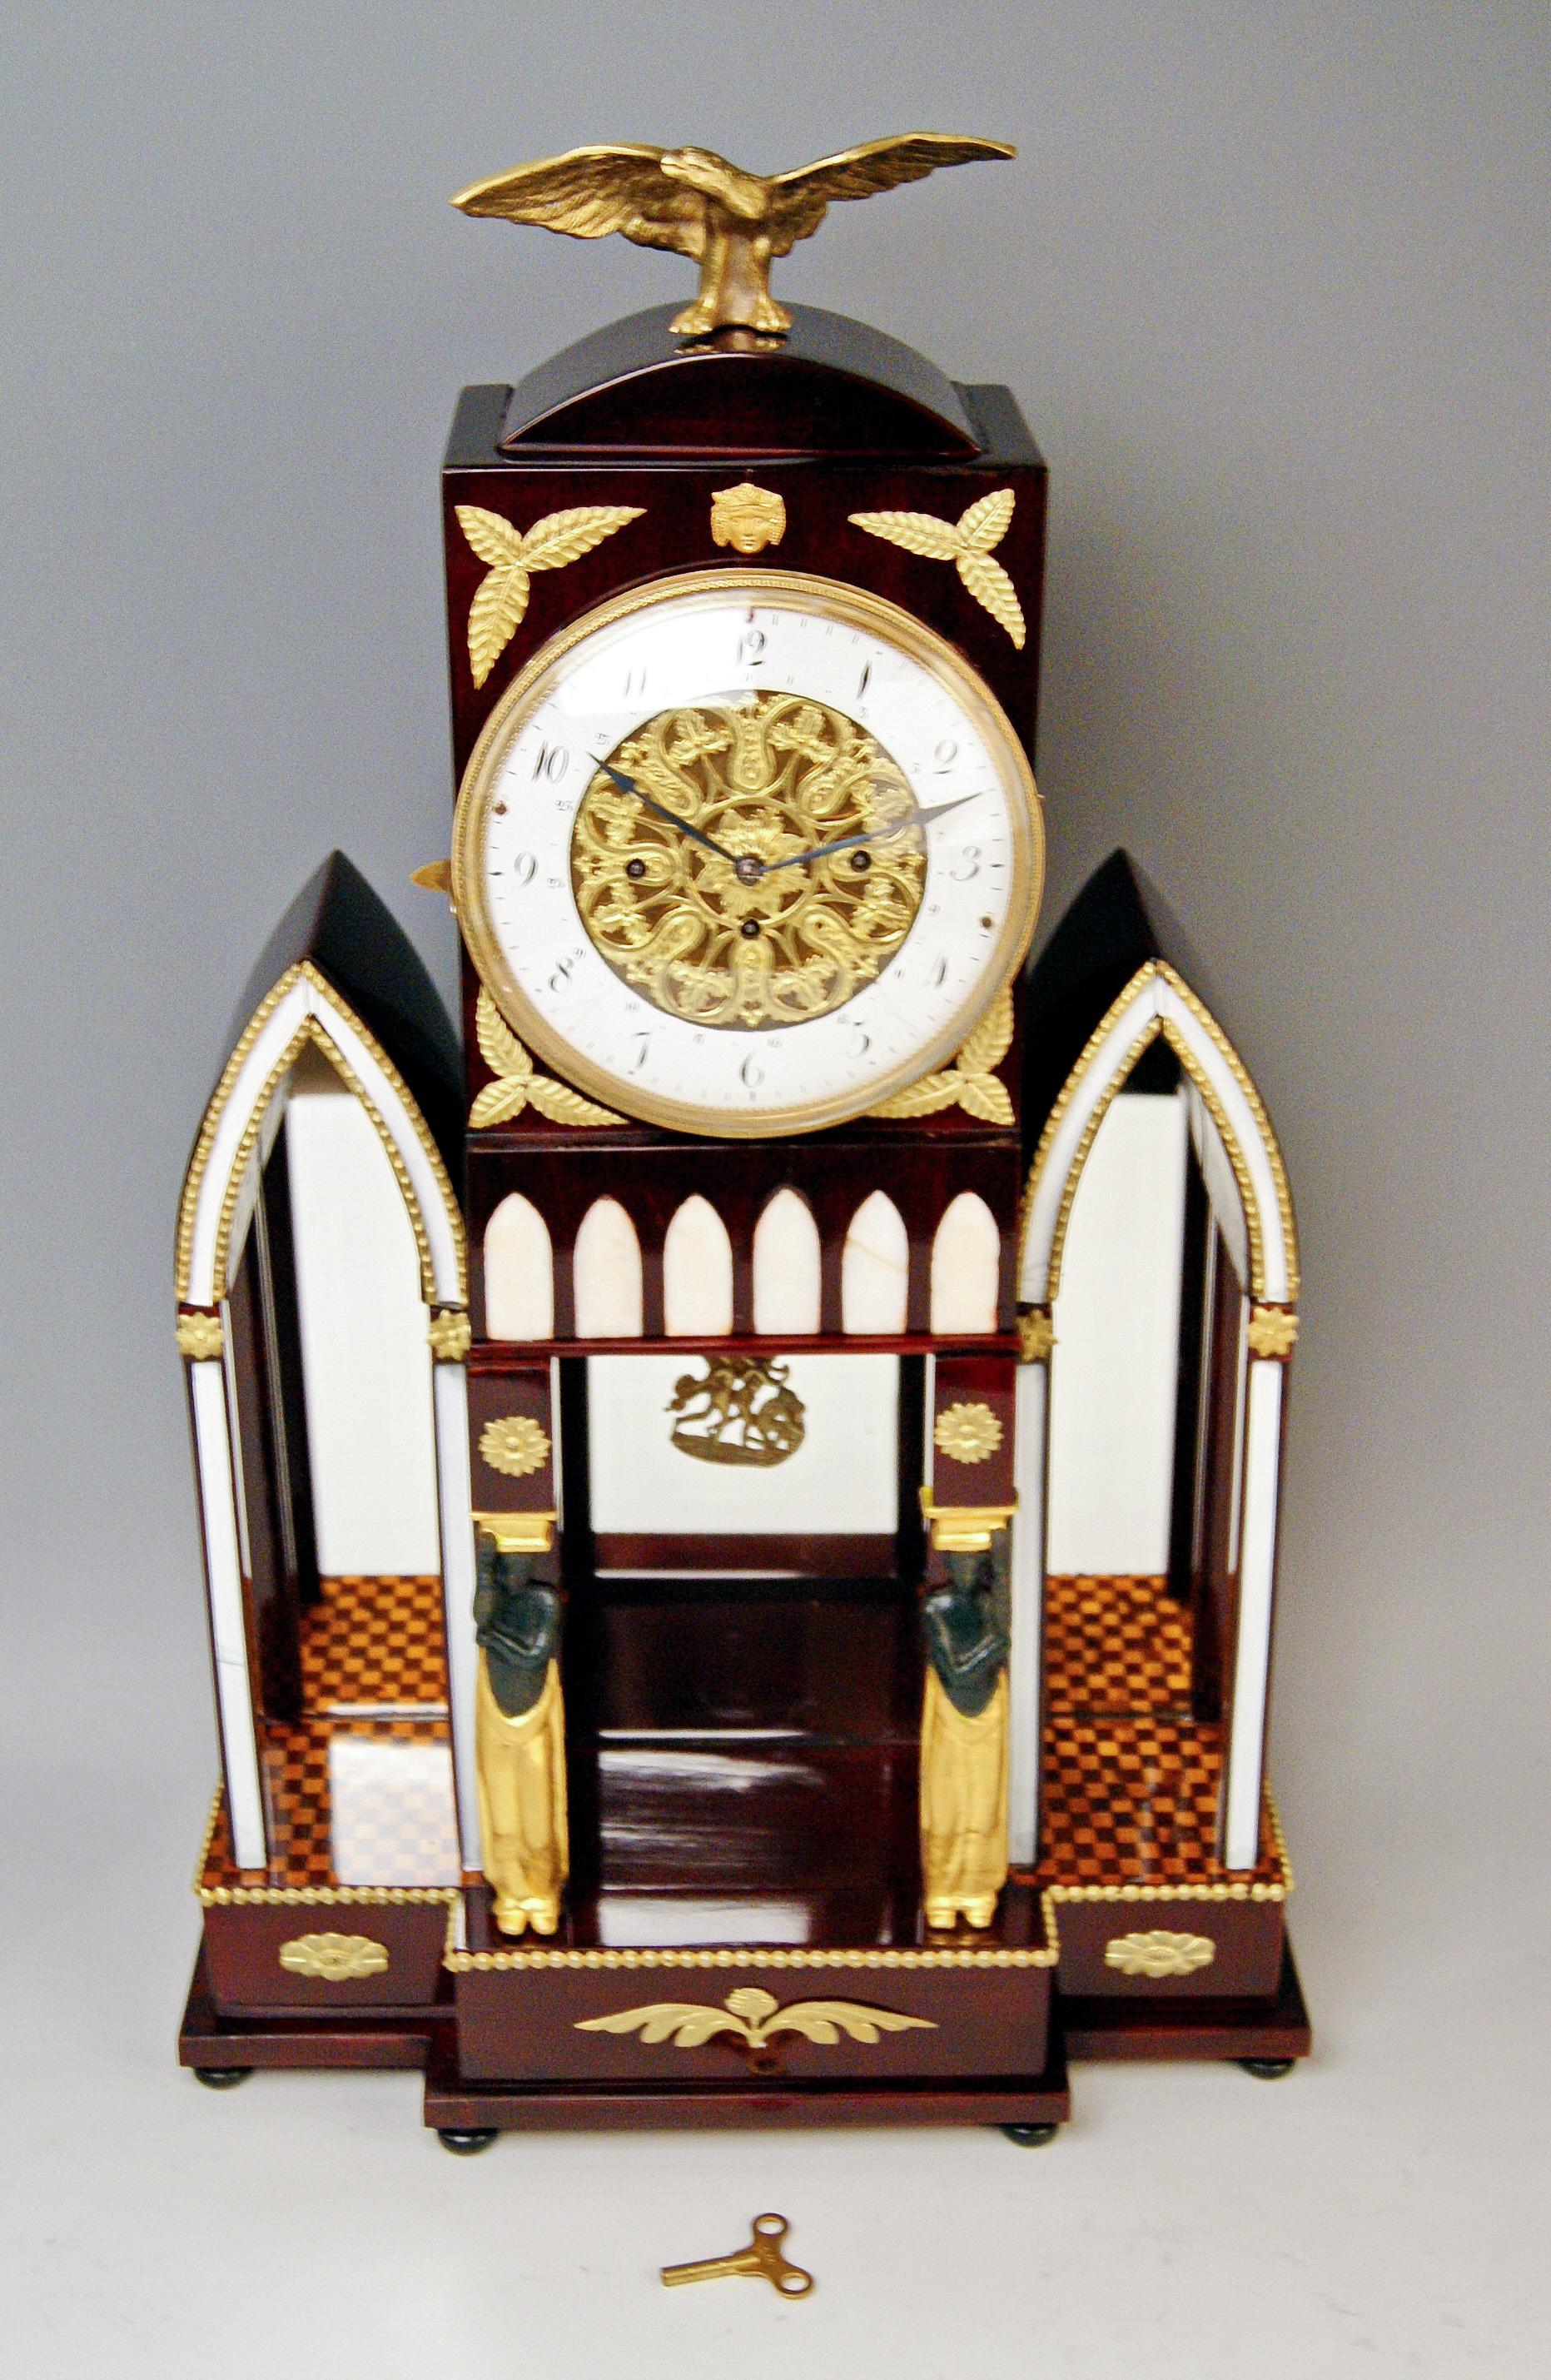 Viennese mantle / mantel / table chiming clock Empire style

Date of manufacture: circa 1810-1820

Material:
The clock's chest is made of stained dark mahogany wood / refurbished and hand-polished
ENAMEL CLOCKFACE (Arabic numerals) / BRASS